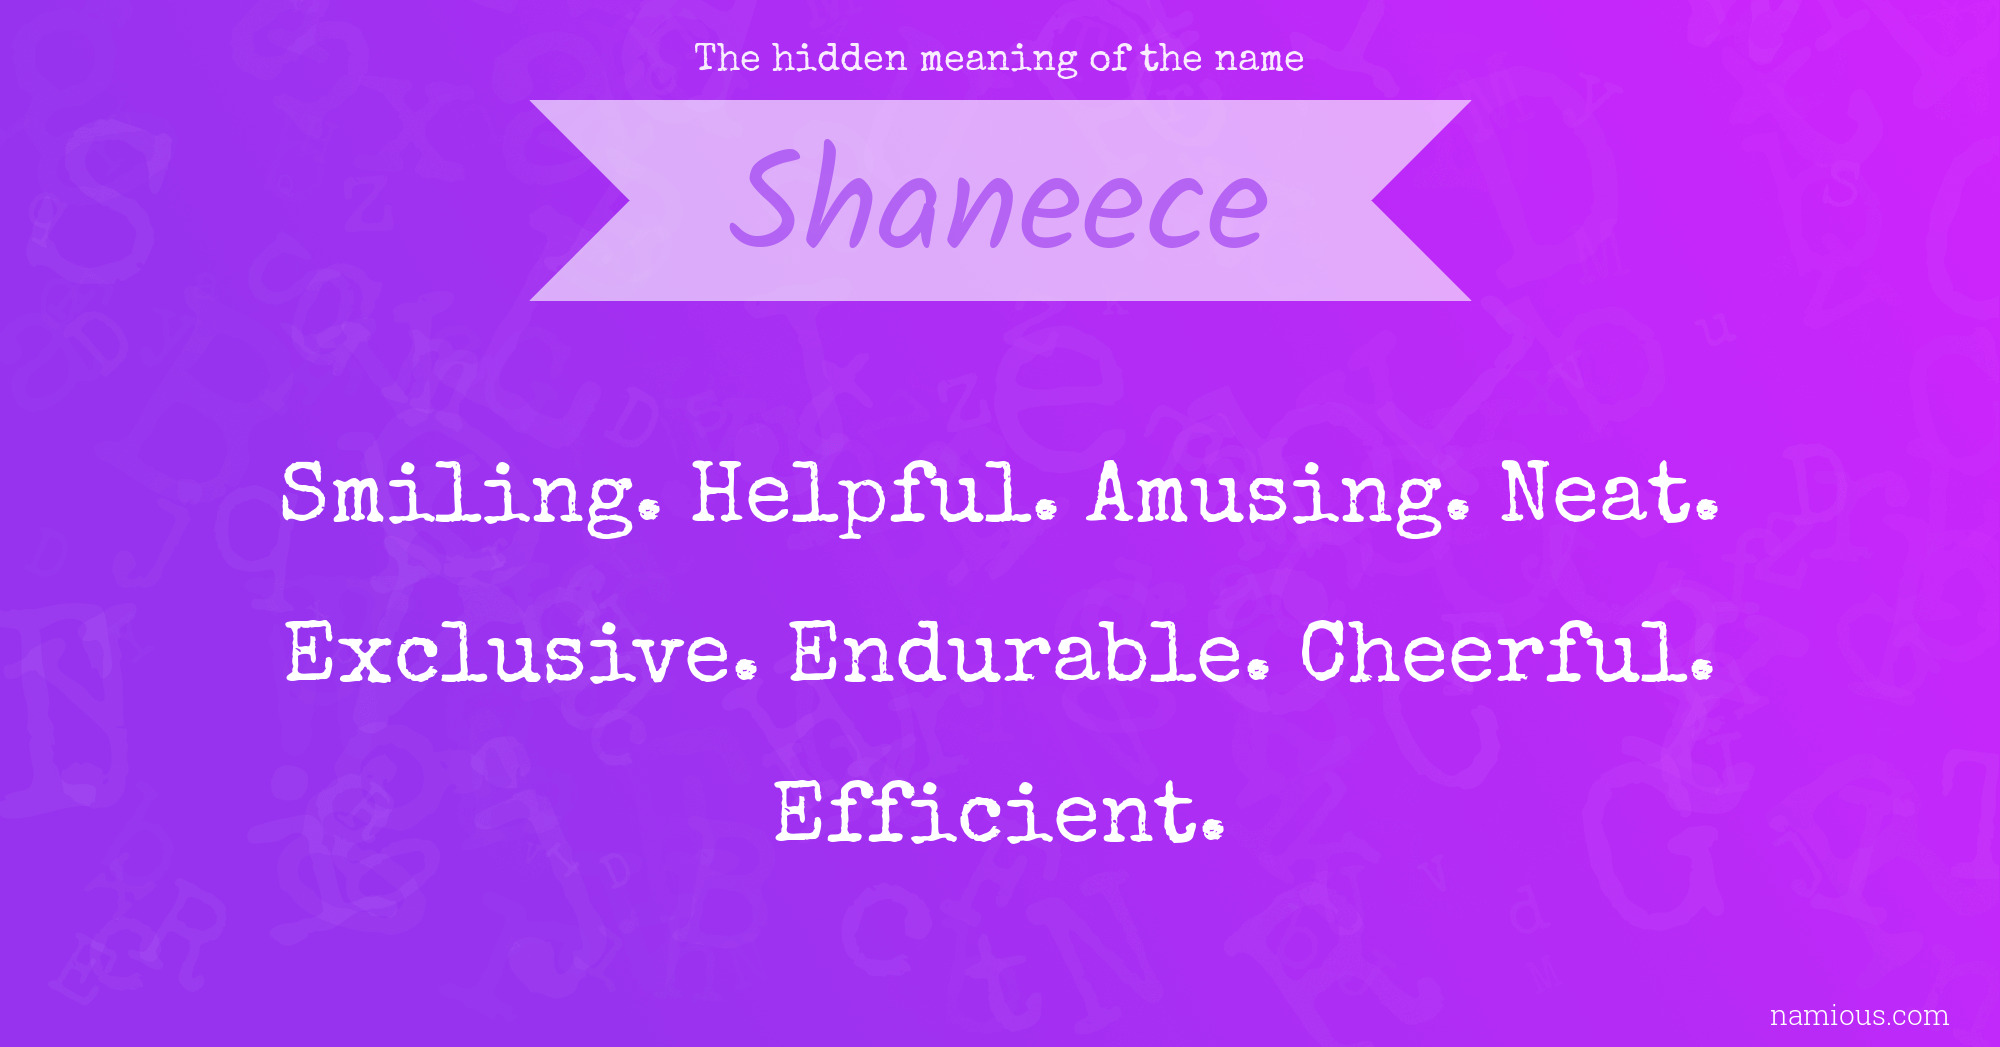 The hidden meaning of the name Shaneece